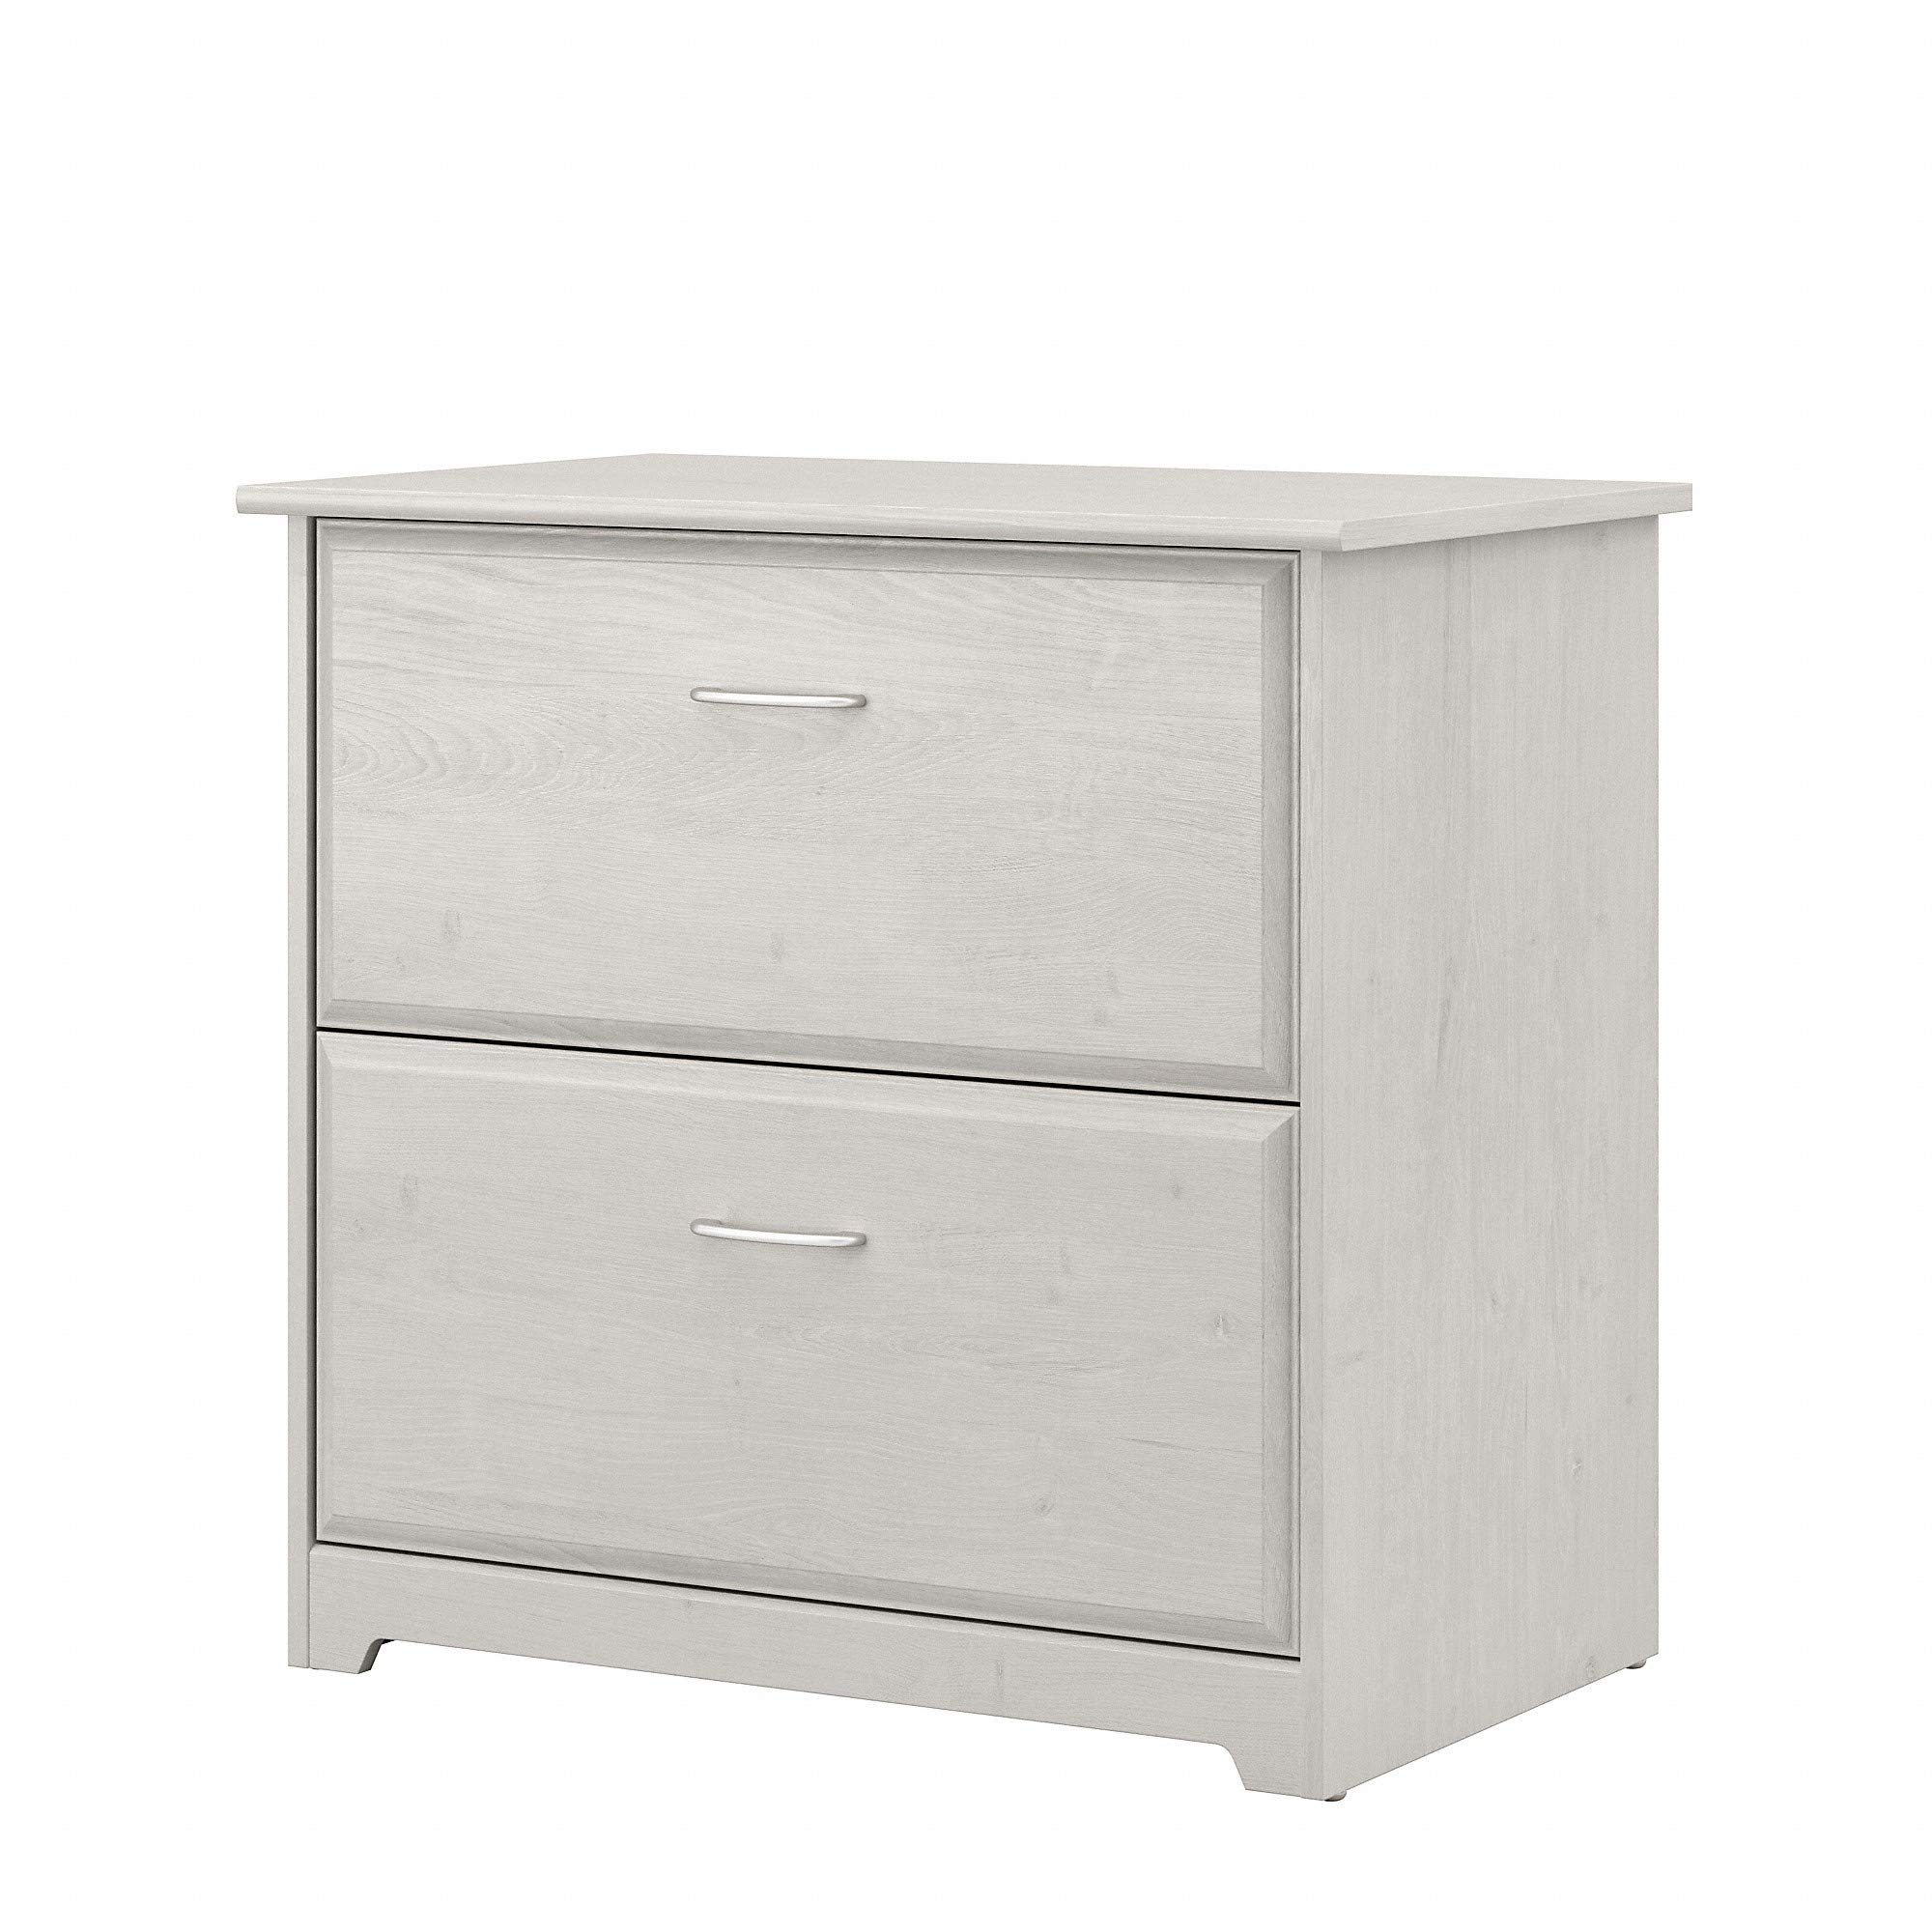 Bush Furniture Cabot 2 Drawer Lateral File Cabinet, Lin...